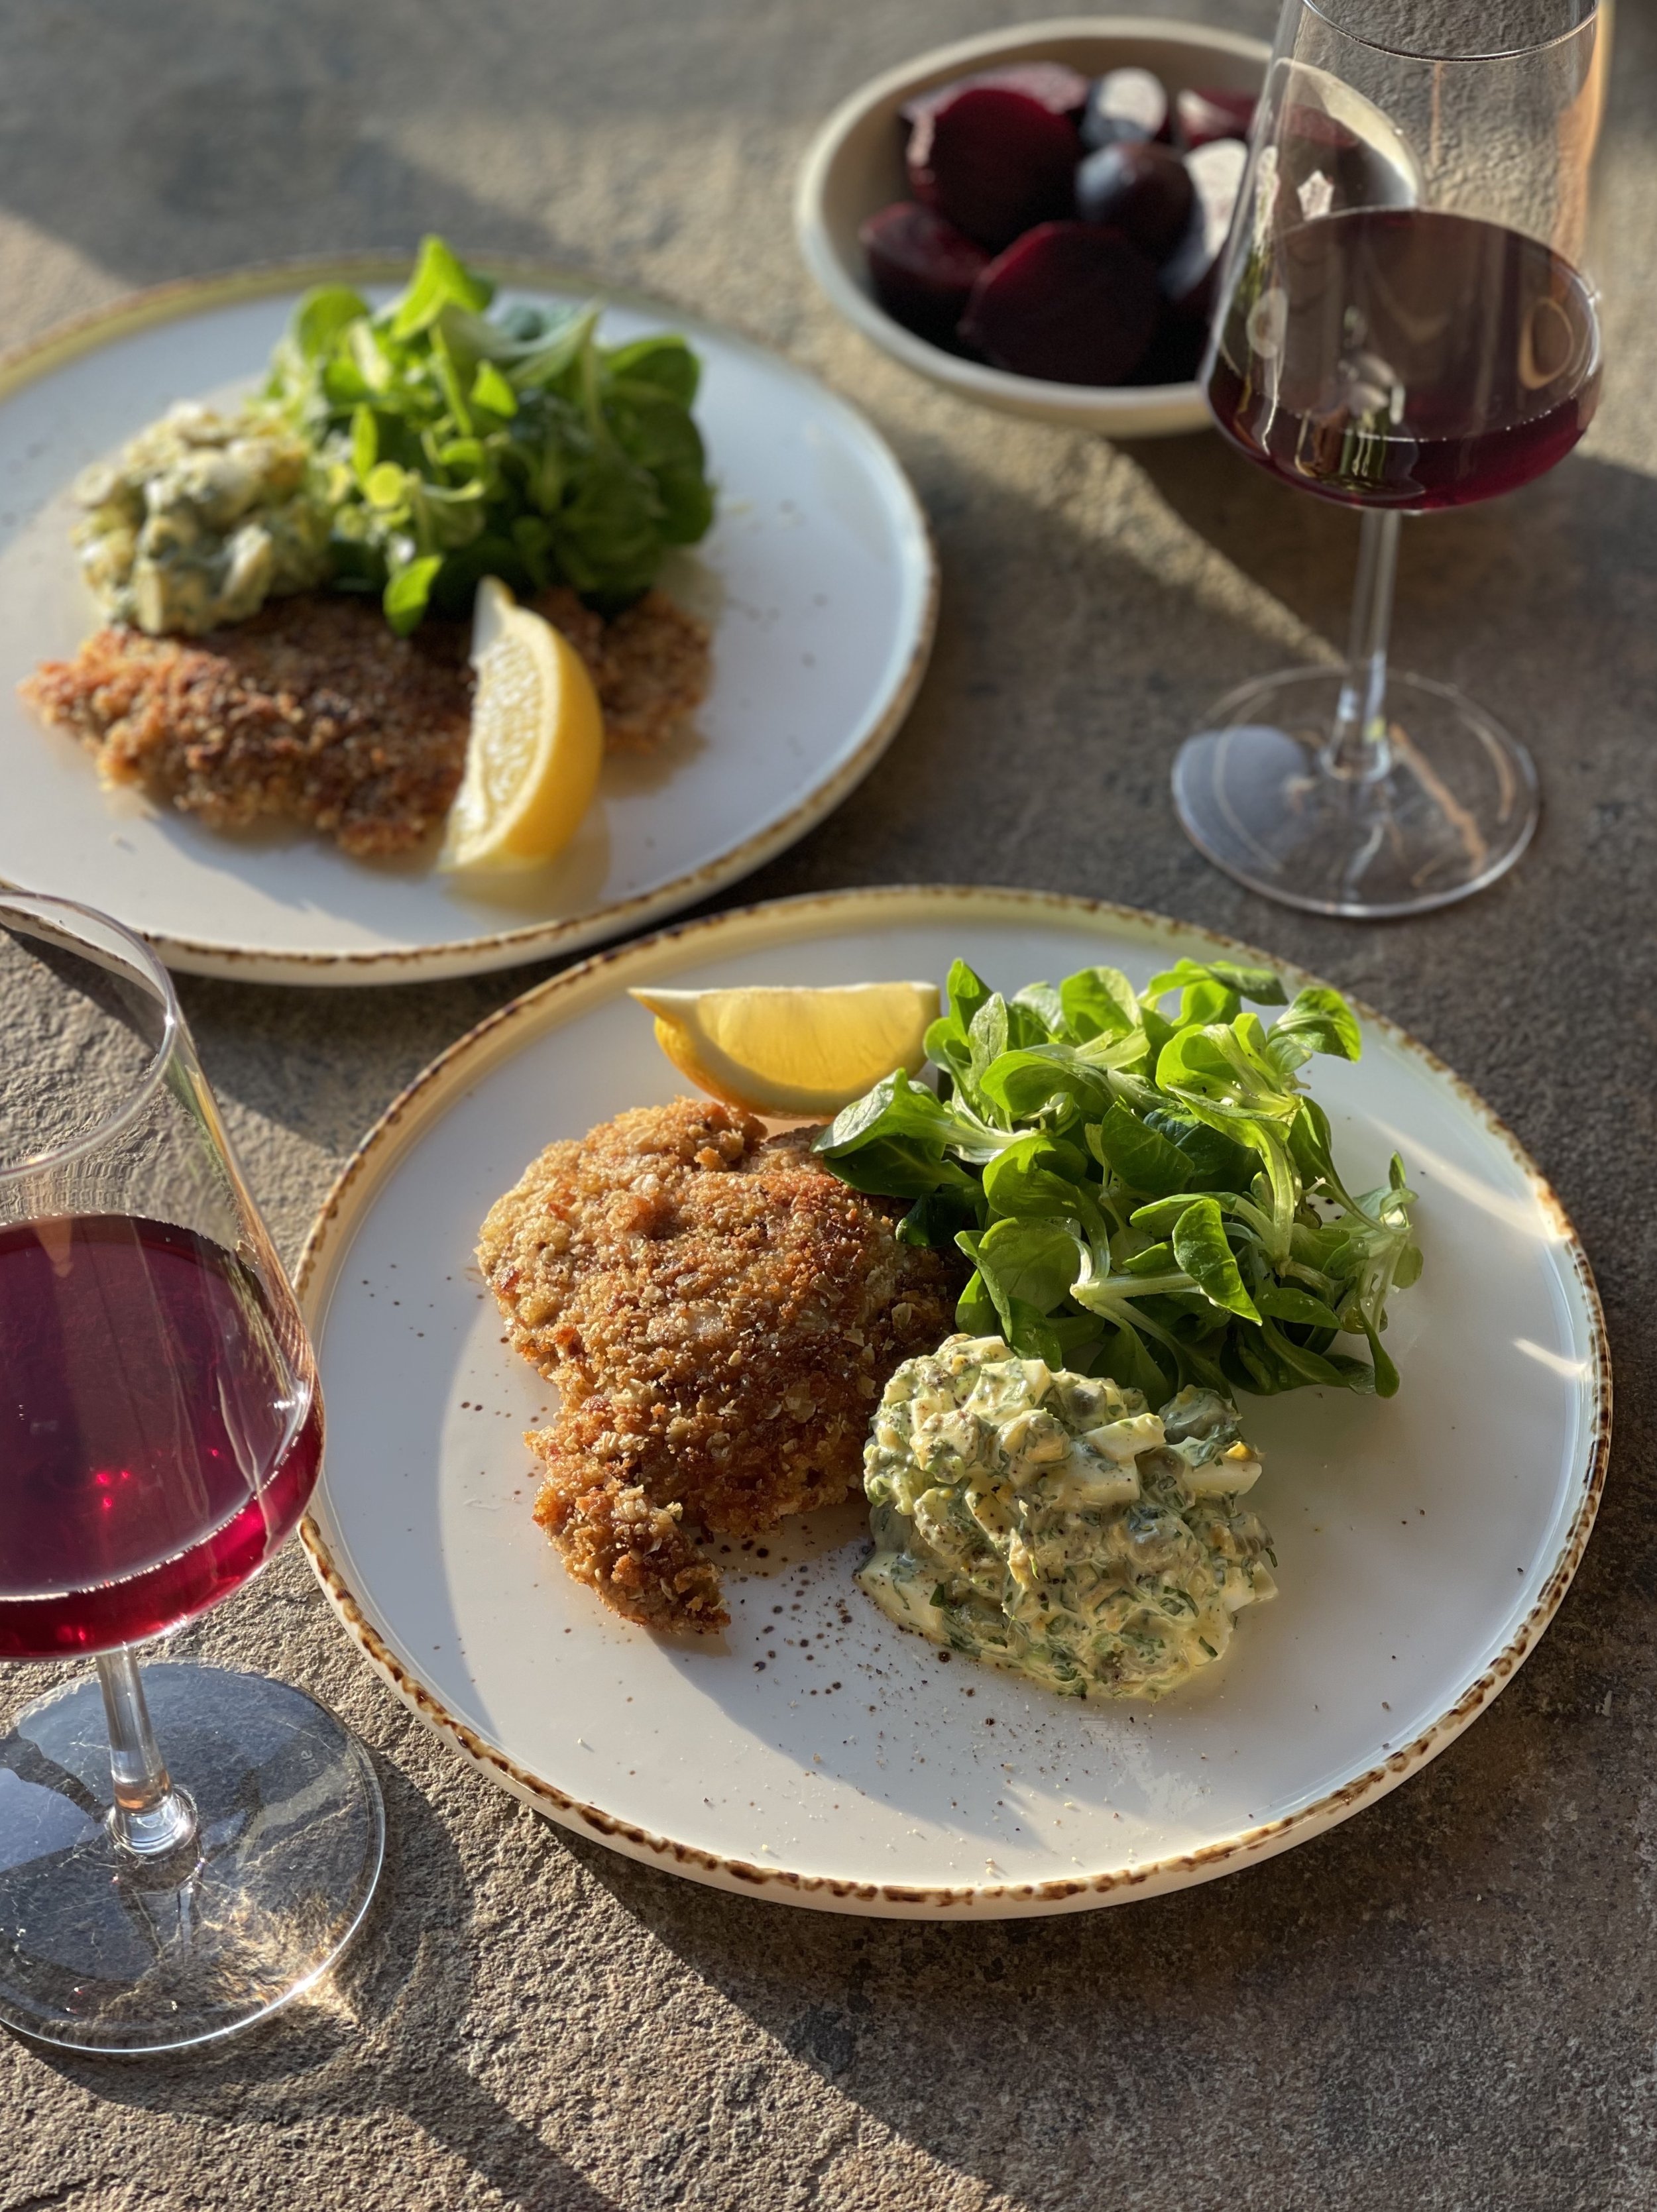 Joey and Katy paired wine with pheasant schnitzel